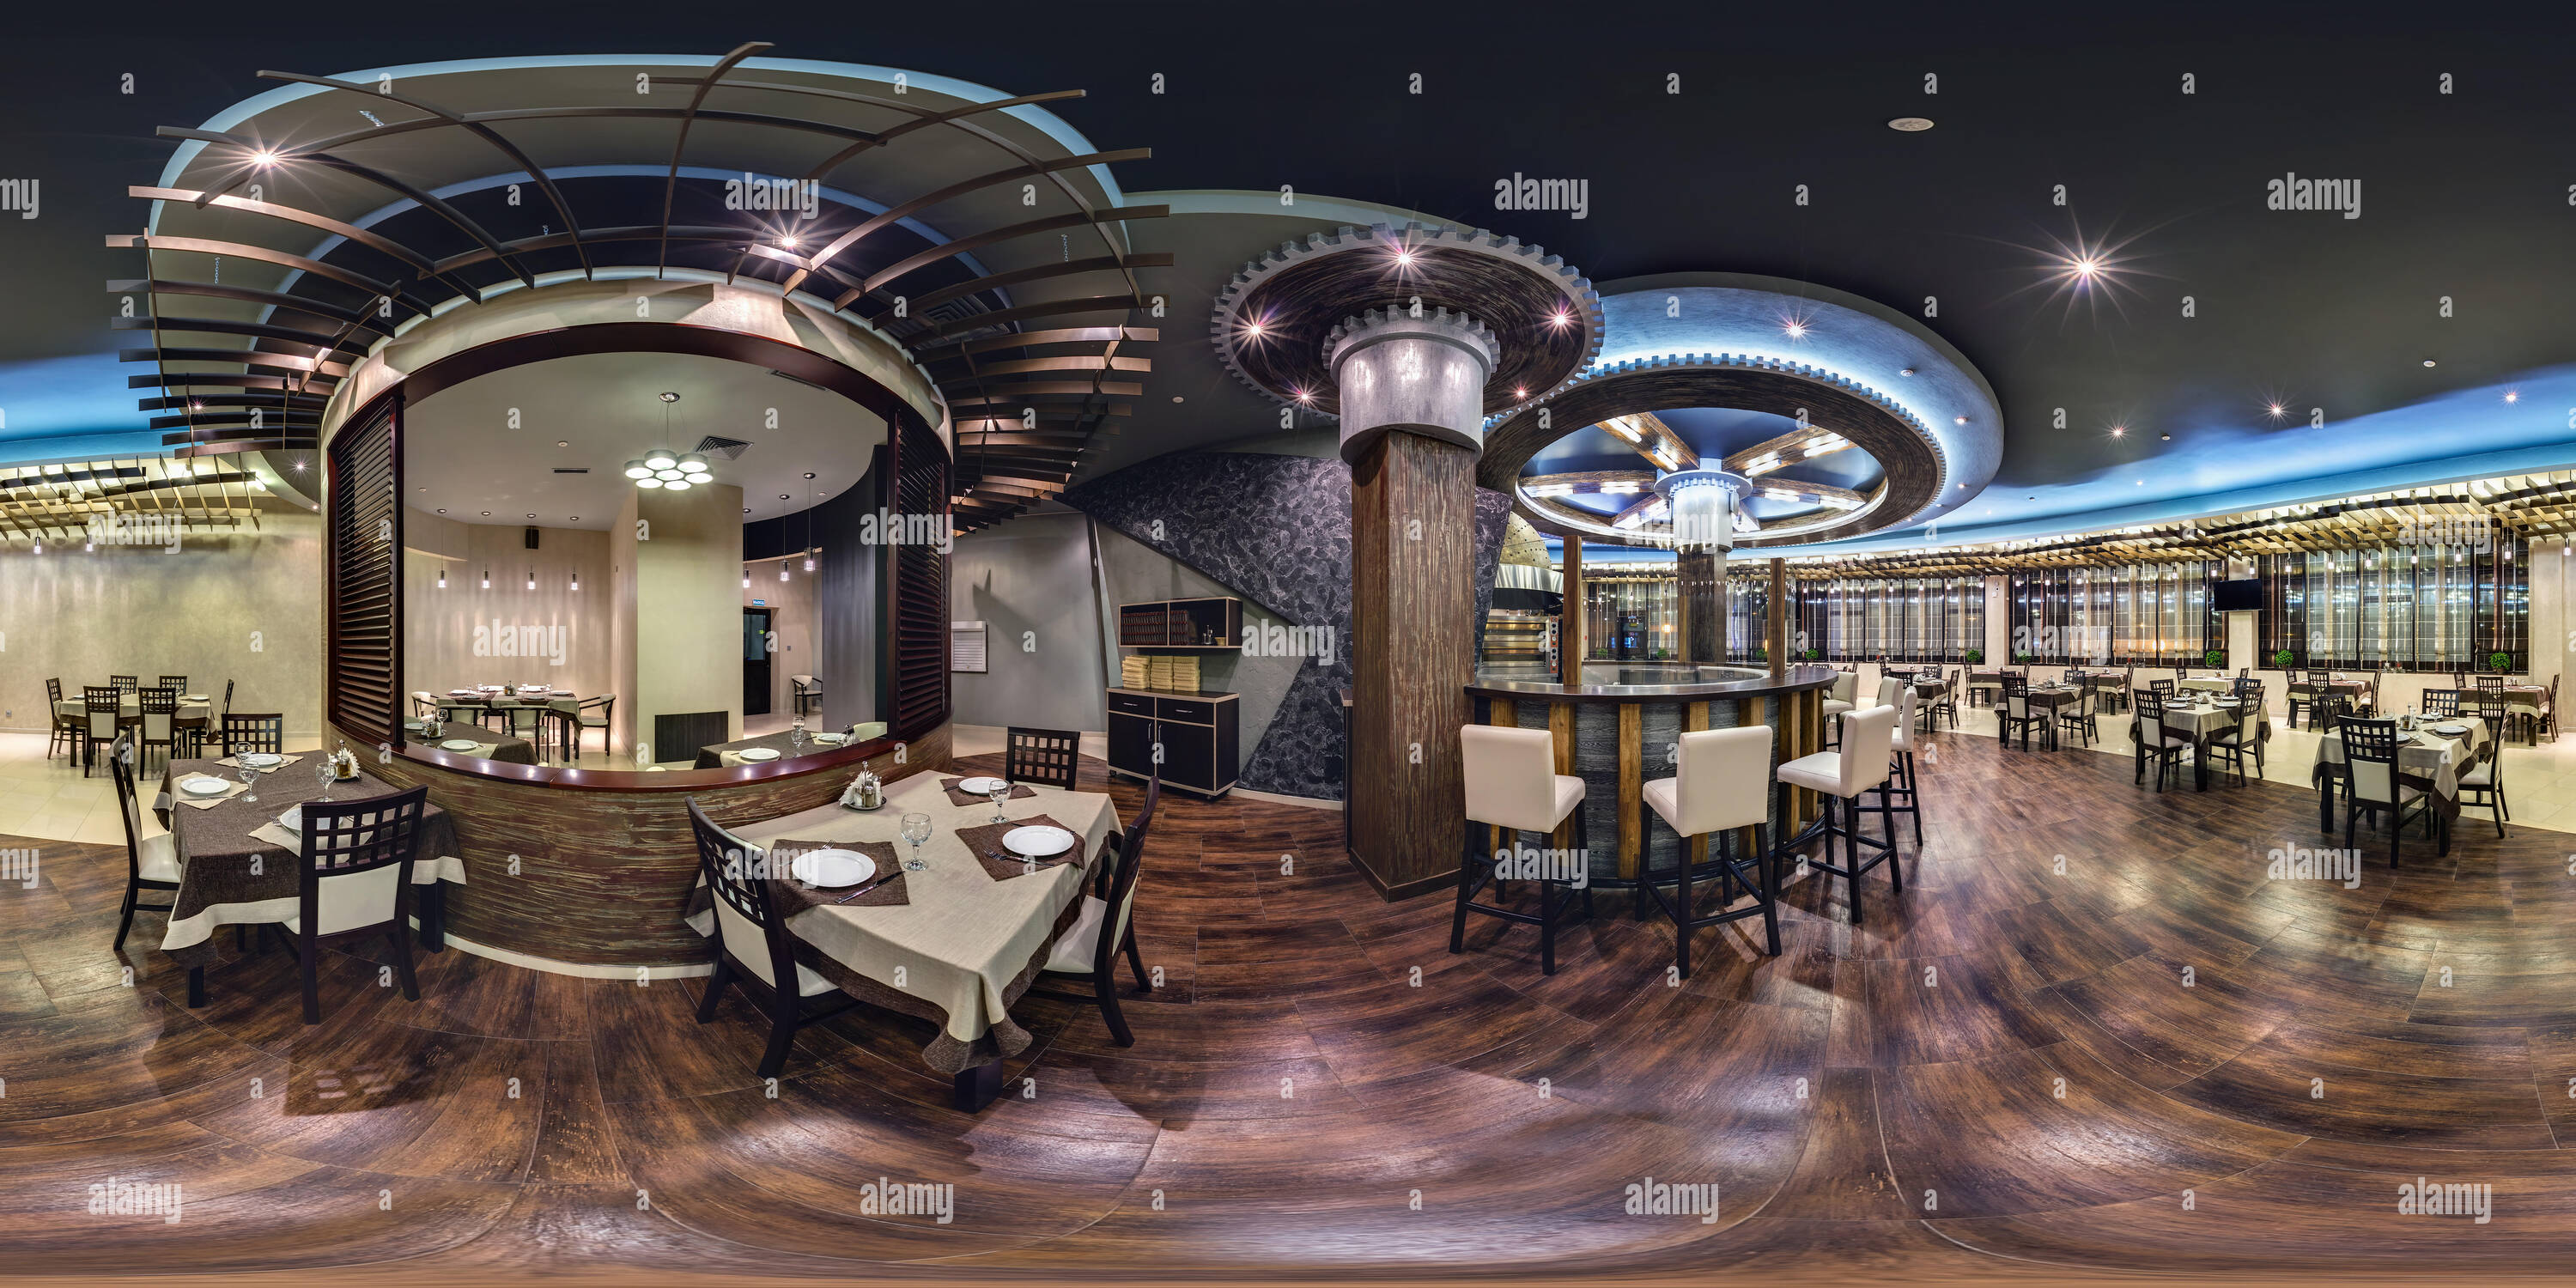 360 degree panoramic view of GRODNO, BELARUS - AUGUST 23, 2013: Full 360 degree panorama in equirectangular equidistant spherical projection in interier stylish vintage restaurant